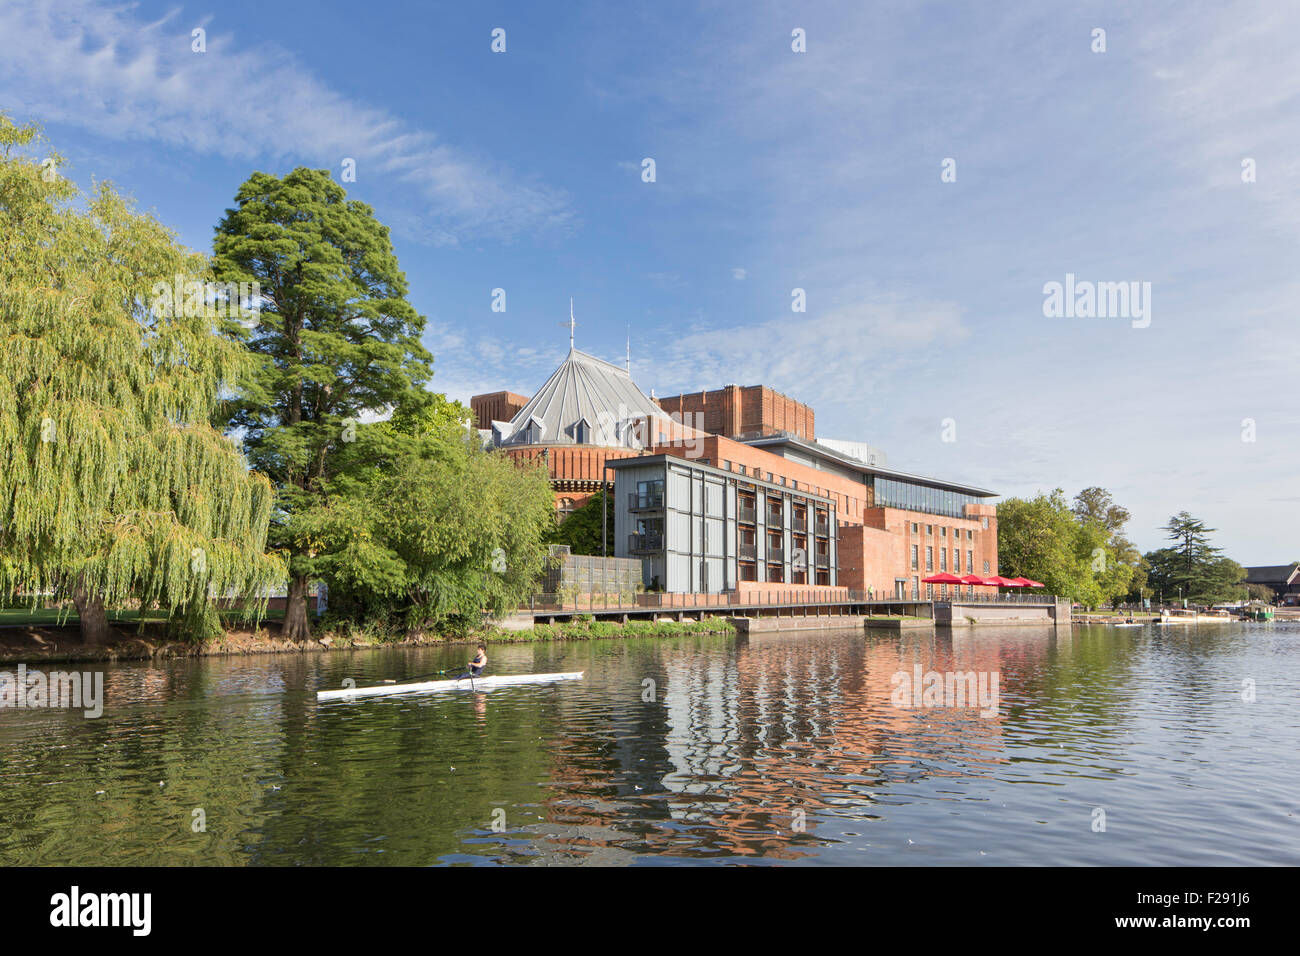 The Royal Shakespeare Theatre, on the banks of the River Avon, Stratford upon Avon, Warwickshire, England, UK Stock Photo